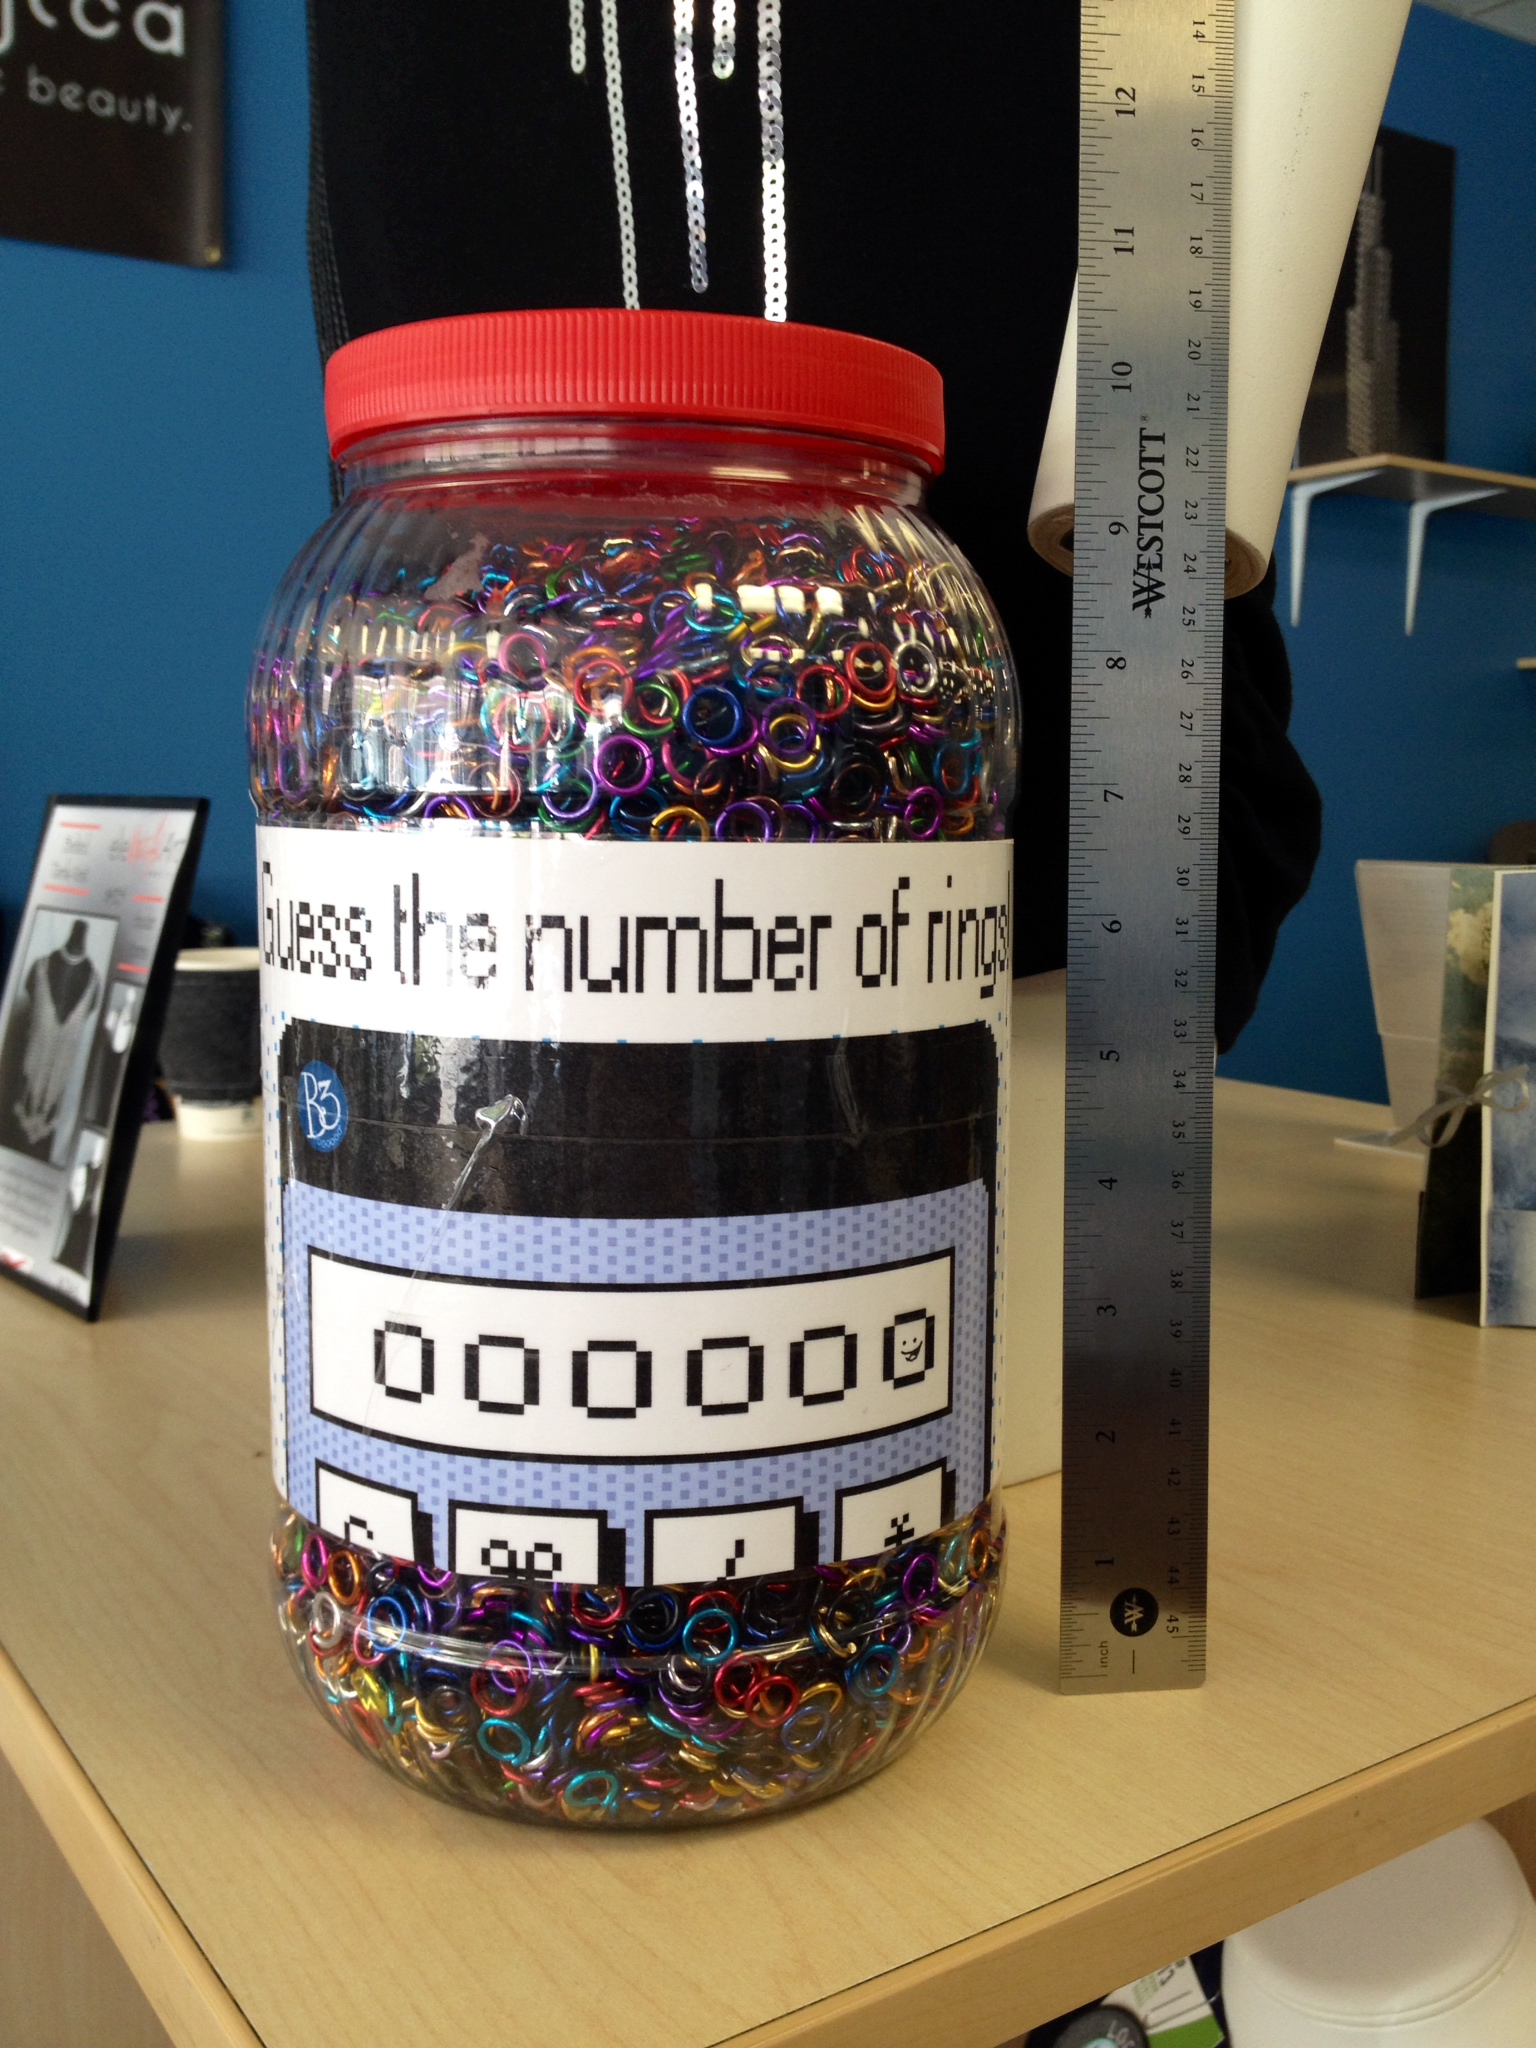 Contest Time: Guess How Many Jump Rings are in the Jar!